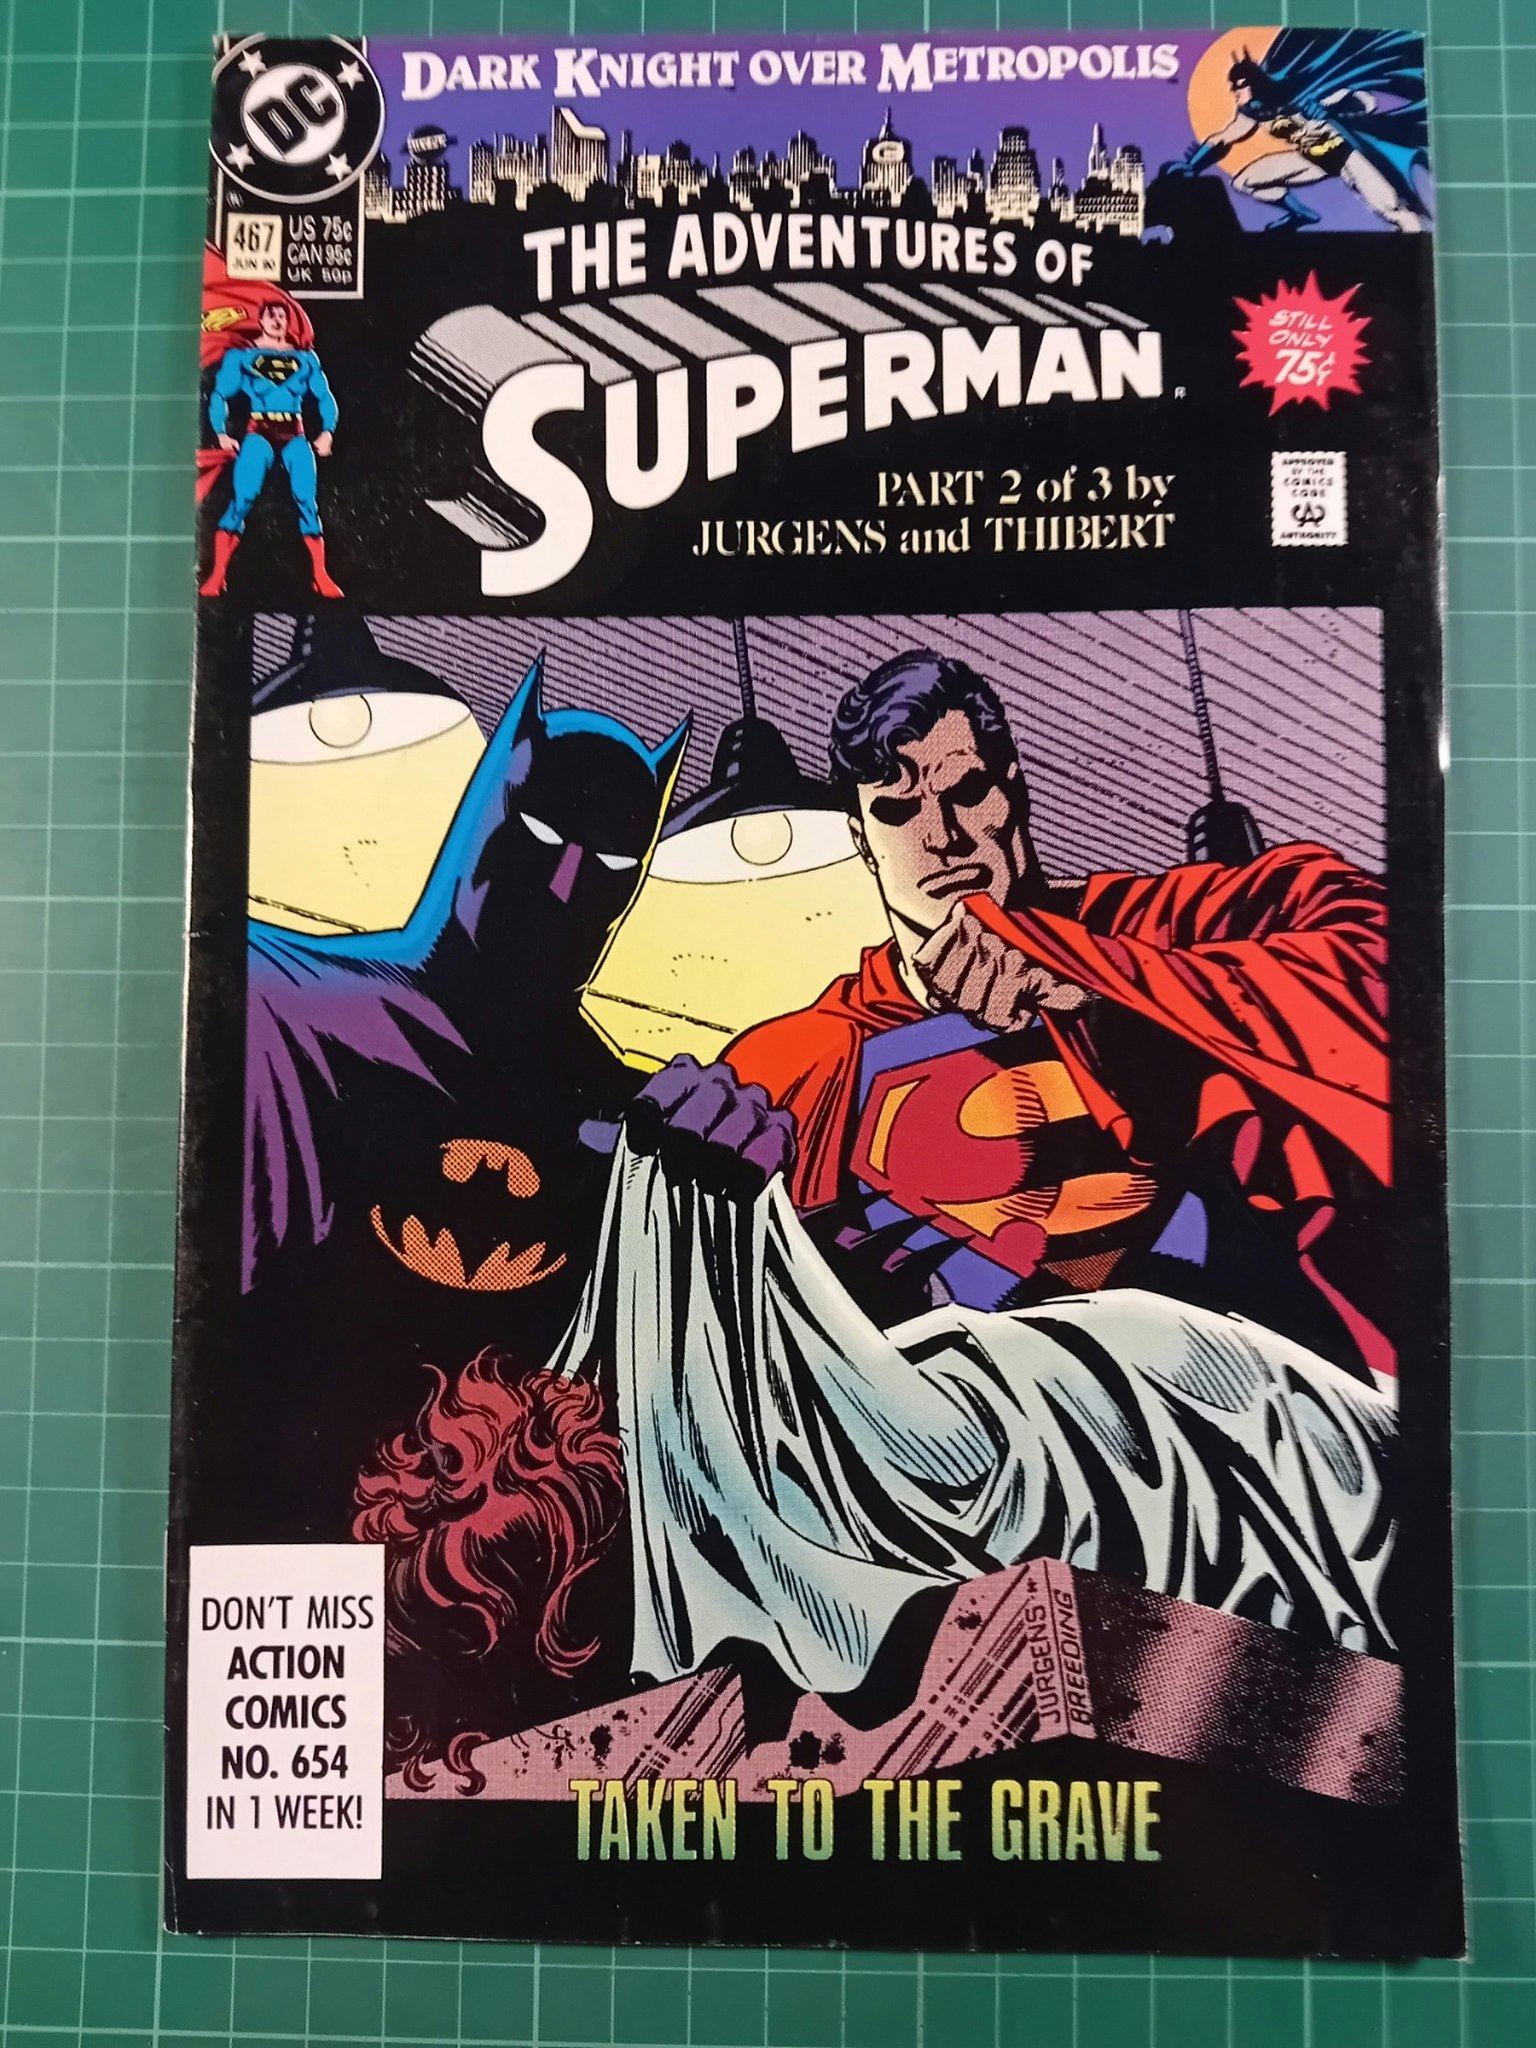 The adventures of Superman #467